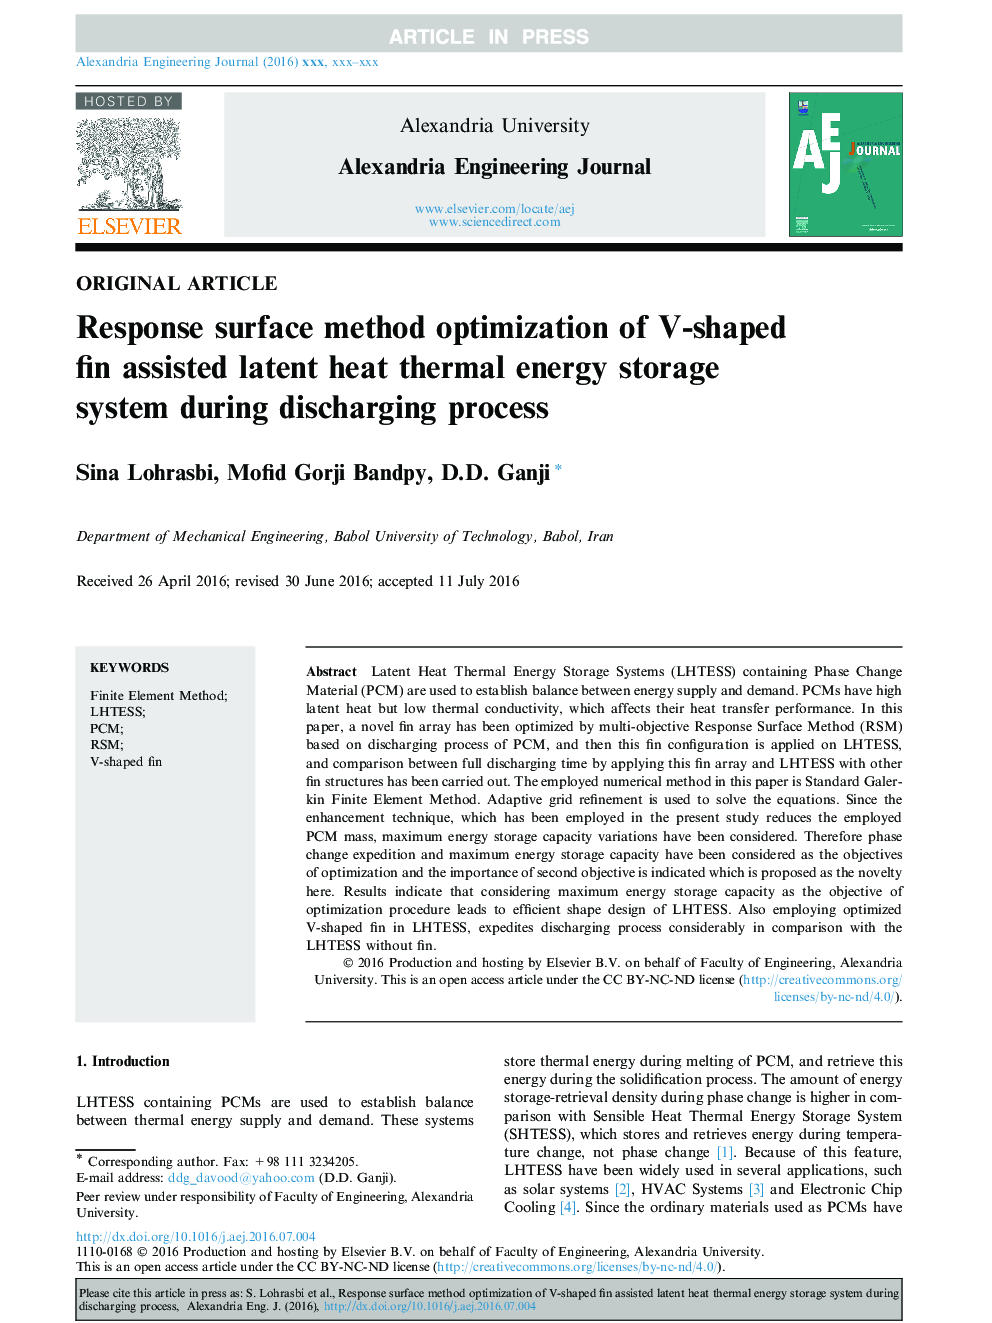 Response surface method optimization of V-shaped fin assisted latent heat thermal energy storage system during discharging process